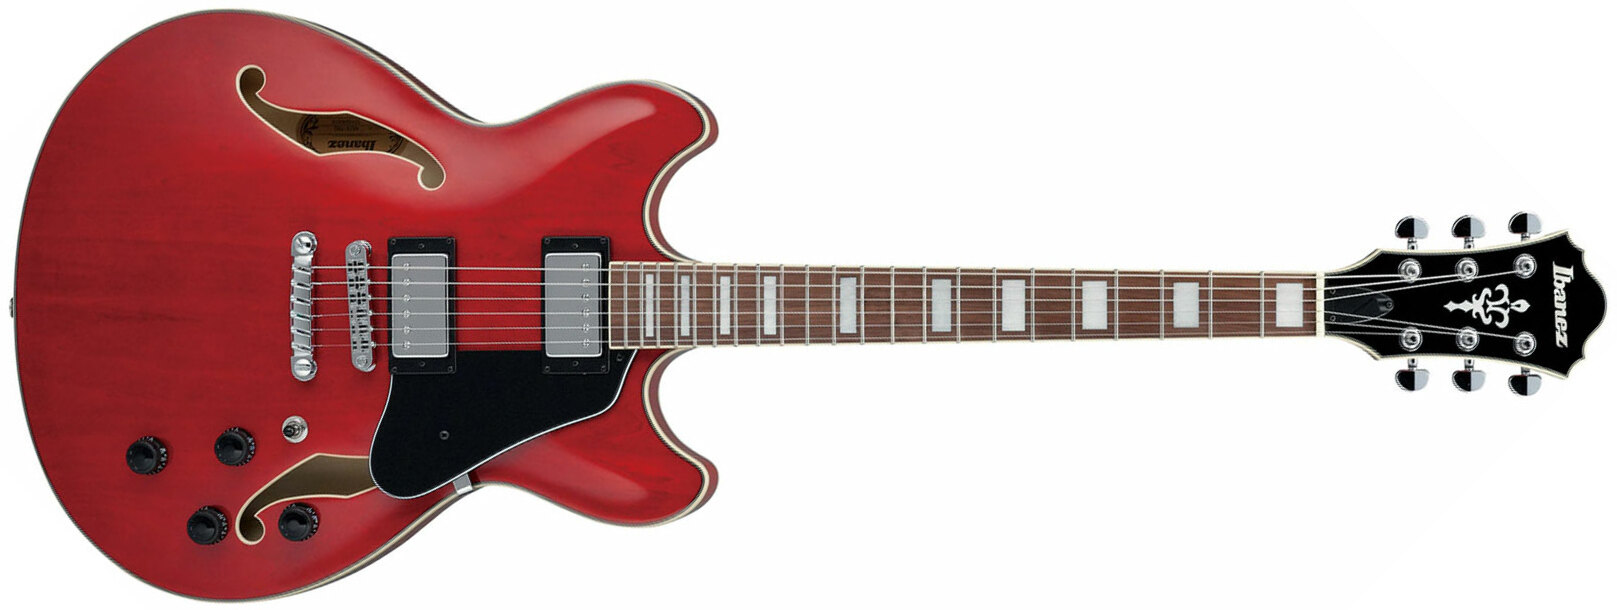 Ibanez As73 Tcd Artcore Hh Ht Noy - Transparent Cherry Red - Semi-Hollow E-Gitarre - Main picture